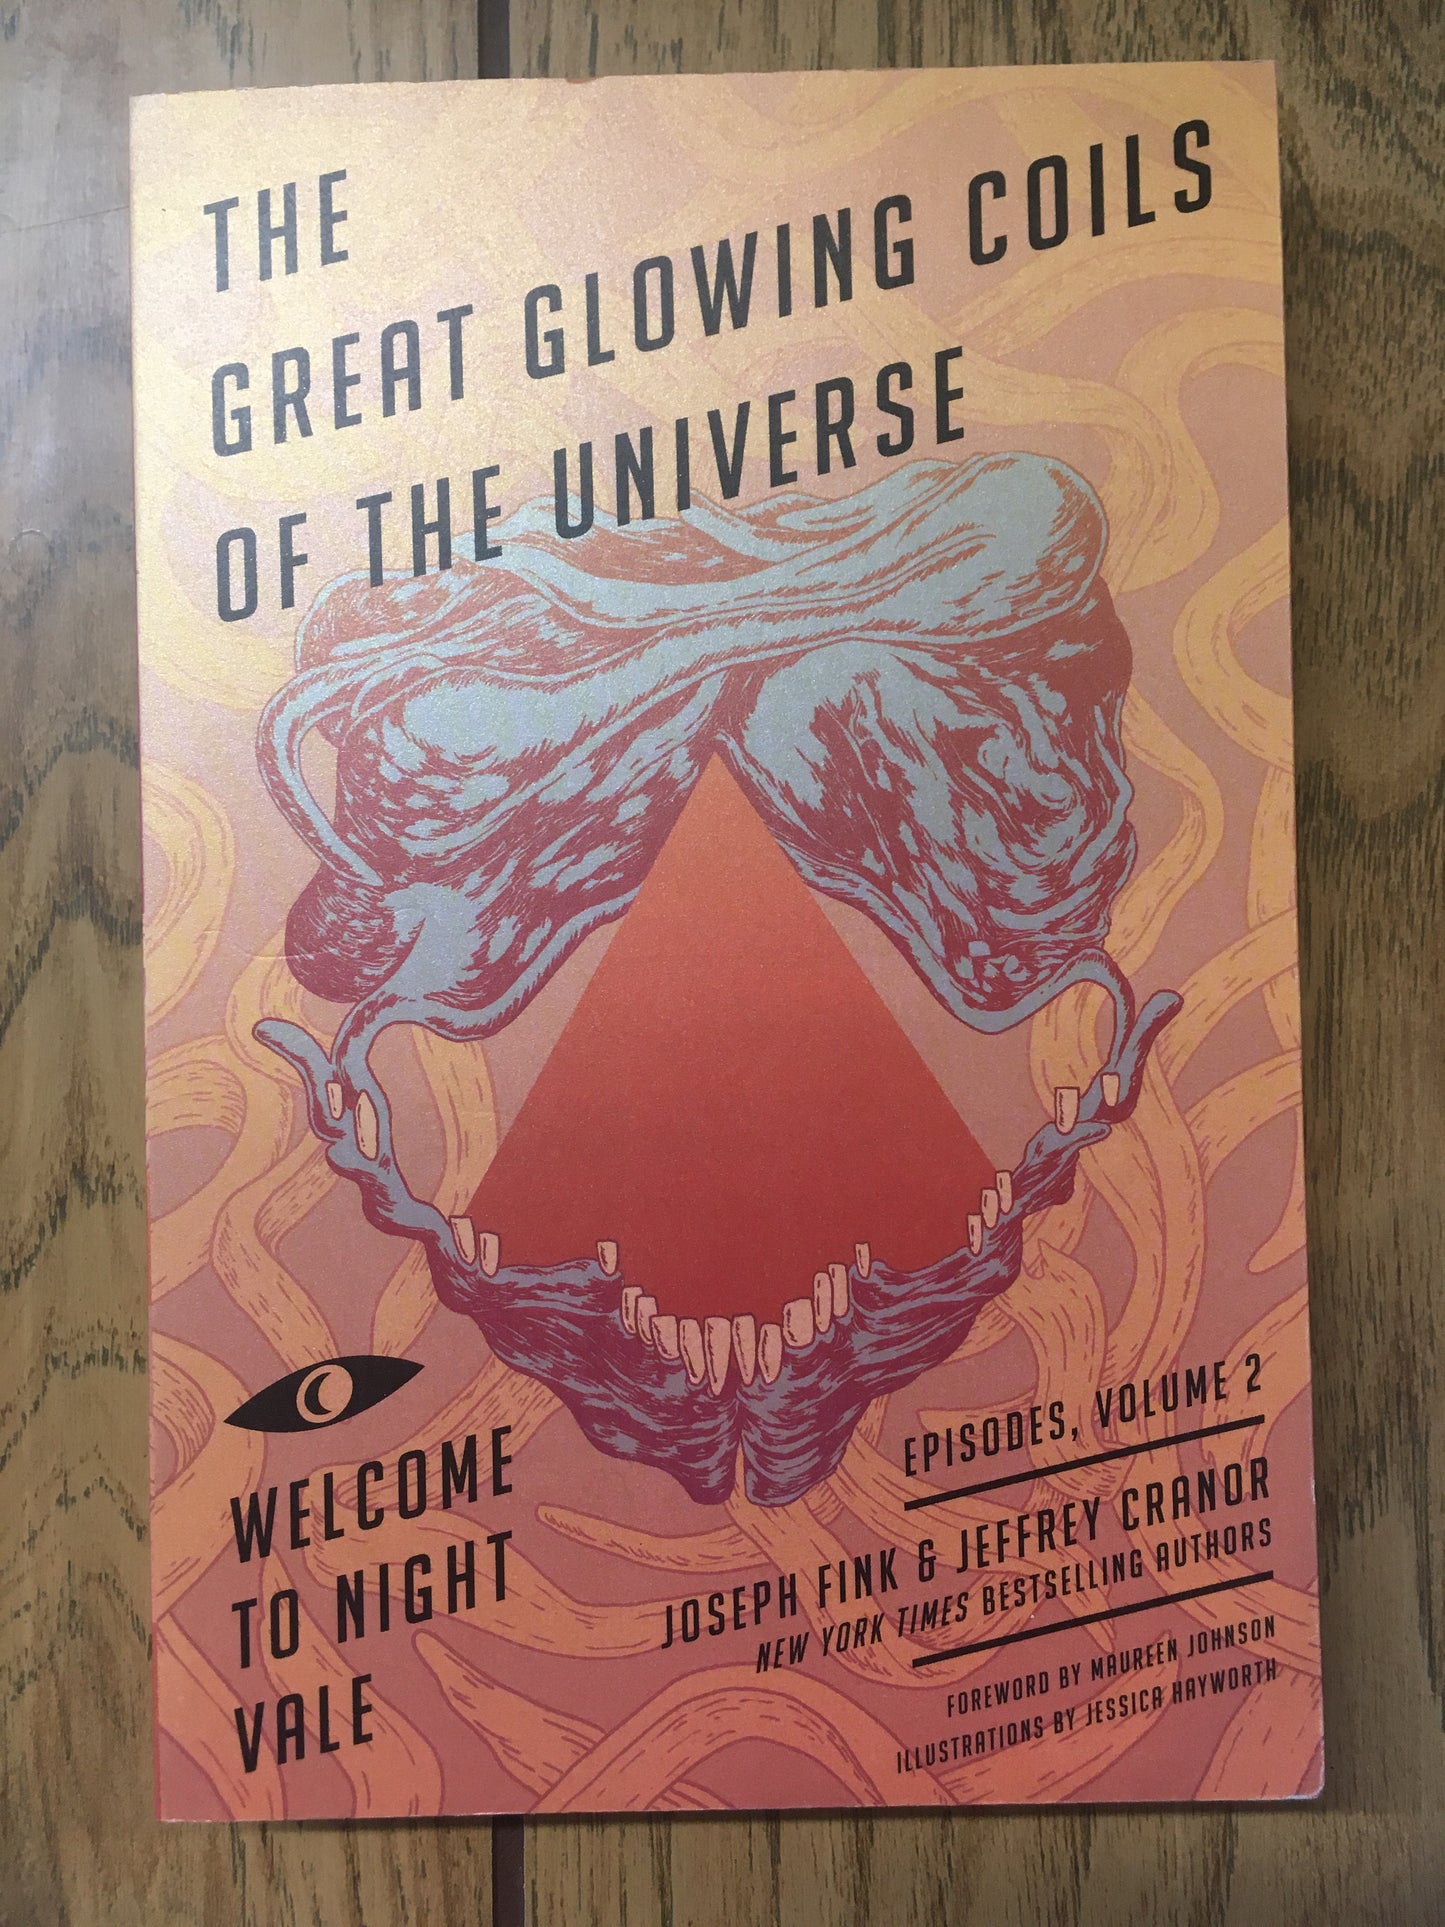 The Great Glowing Coils of the Universe (a Night Vale Novel, Episodes Vol 2)